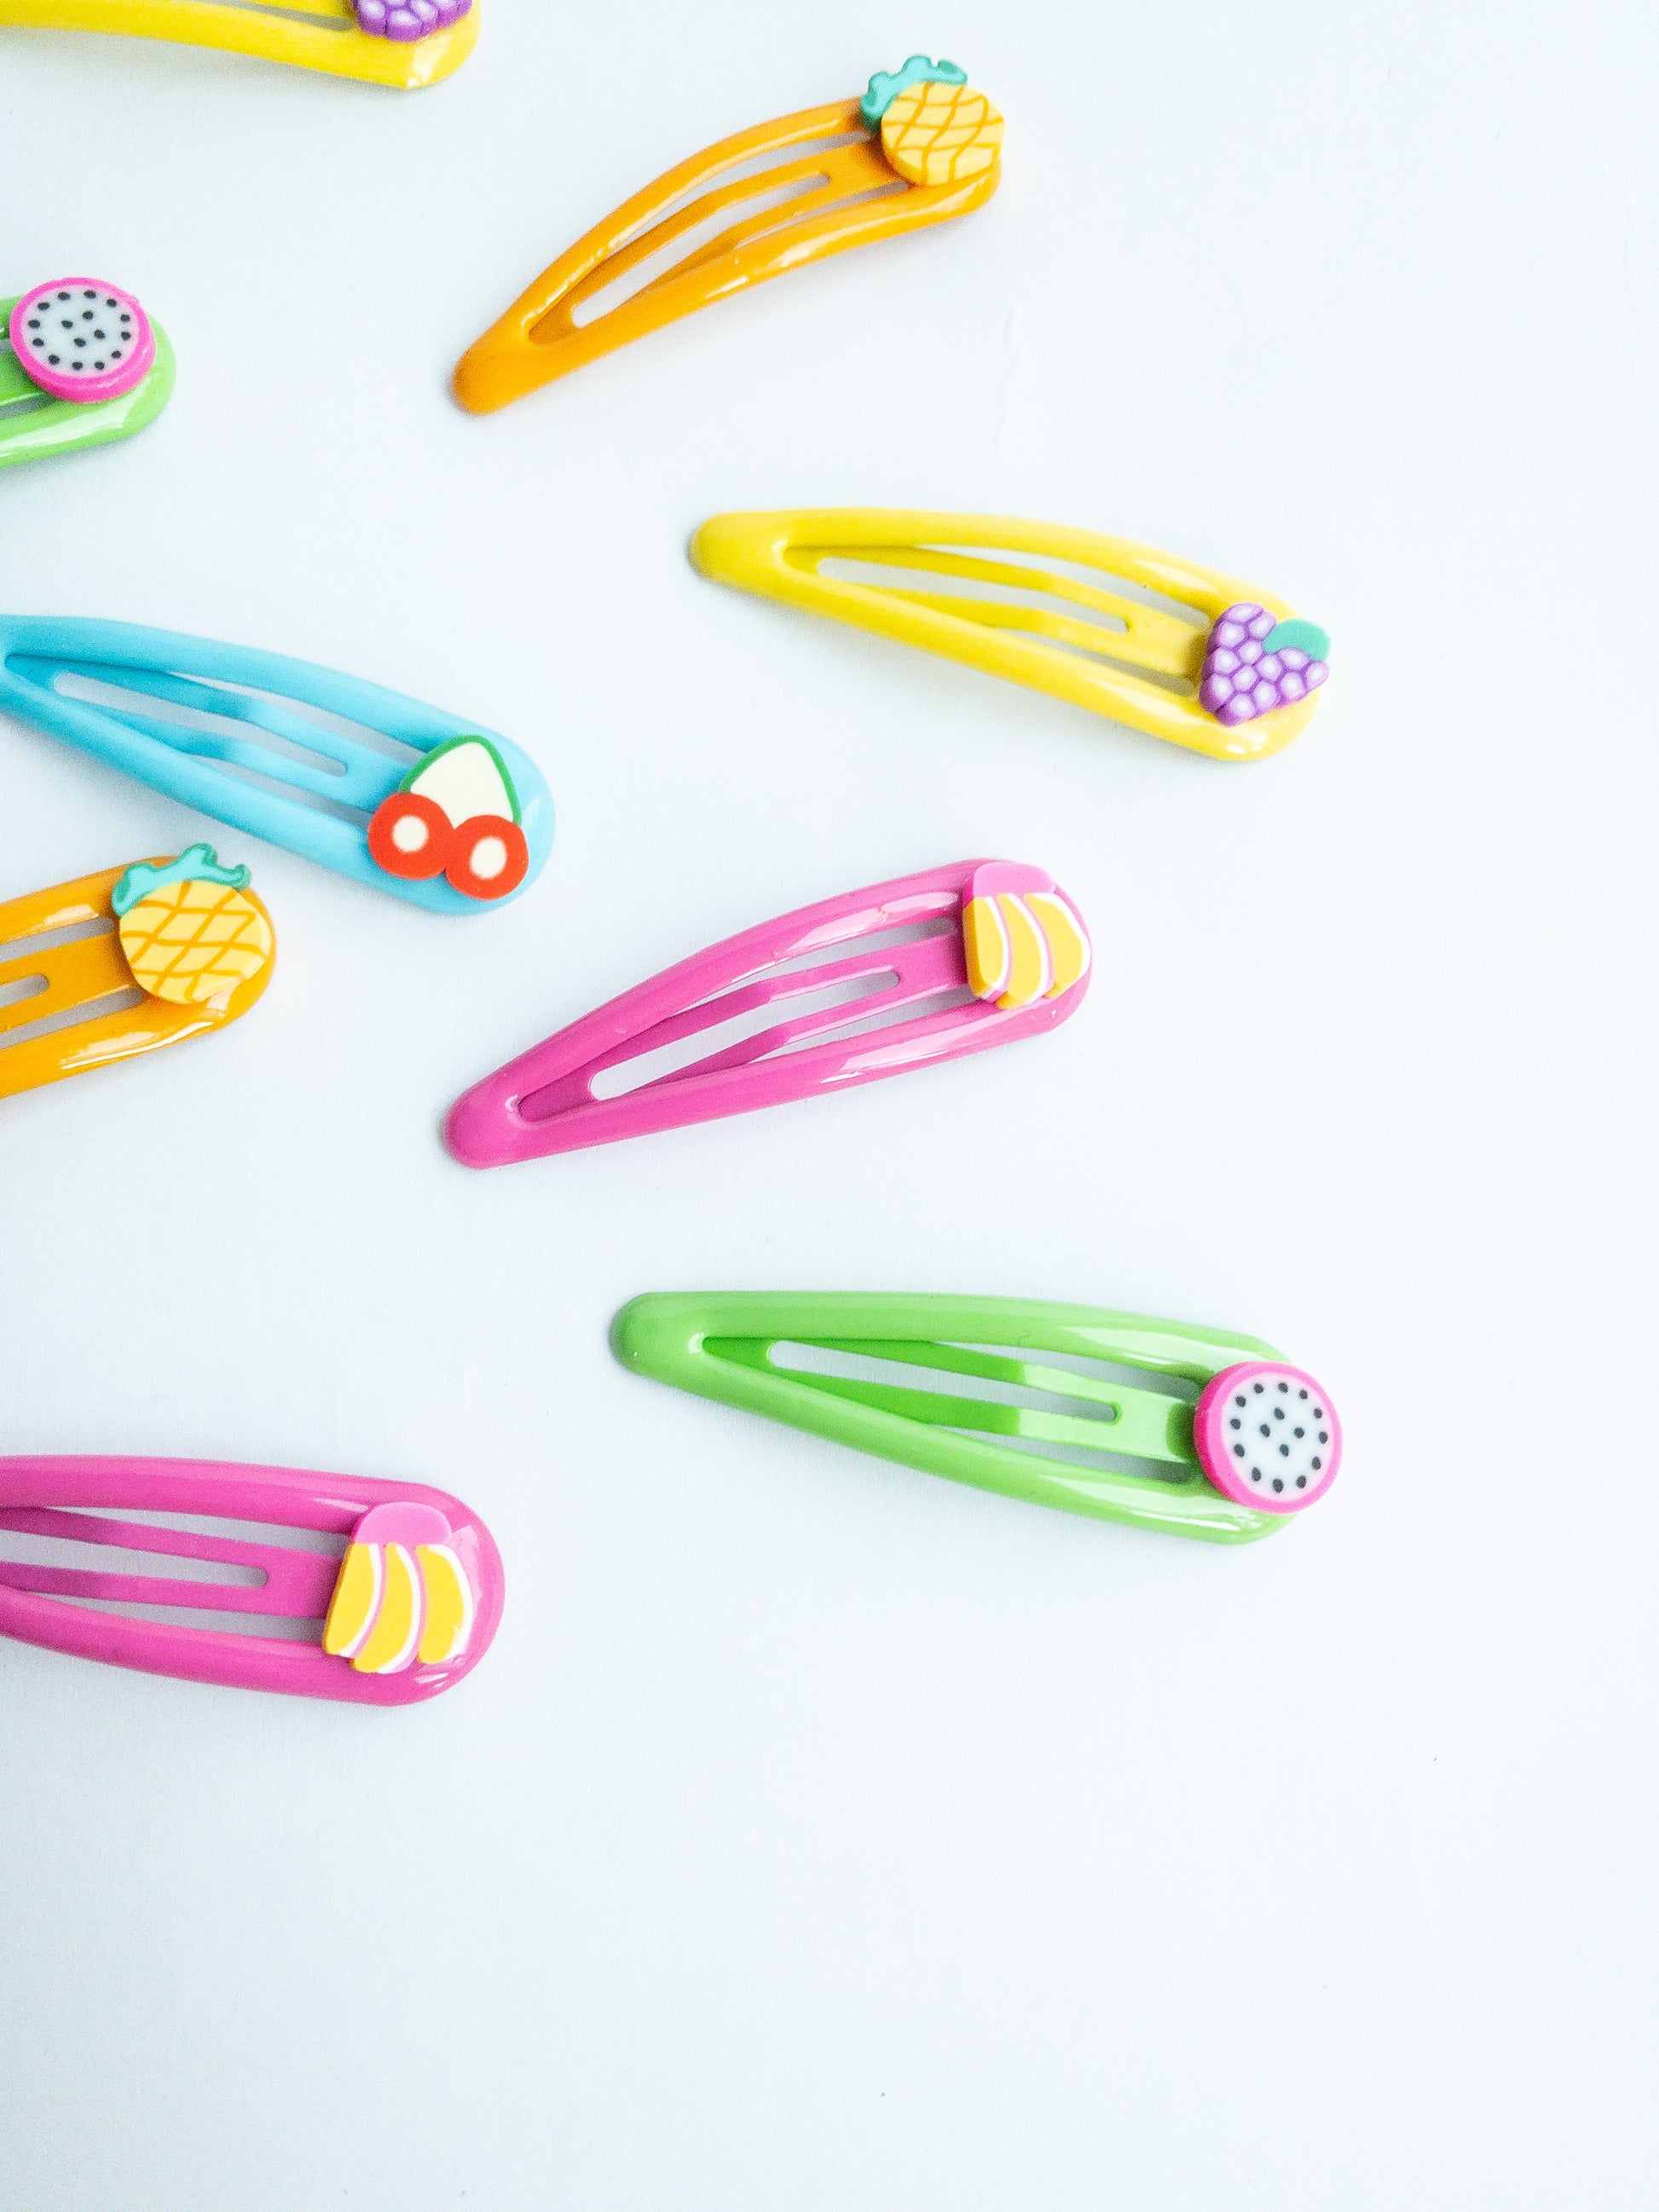 Add a sweet touch to your look with our adorable Little Fruits Hair Clips! These colorful clips come in a variety of fruit shapes and colors to brighten up any 'do. There's a dragon fruit, grapes, banana, cherry, and pineapple.